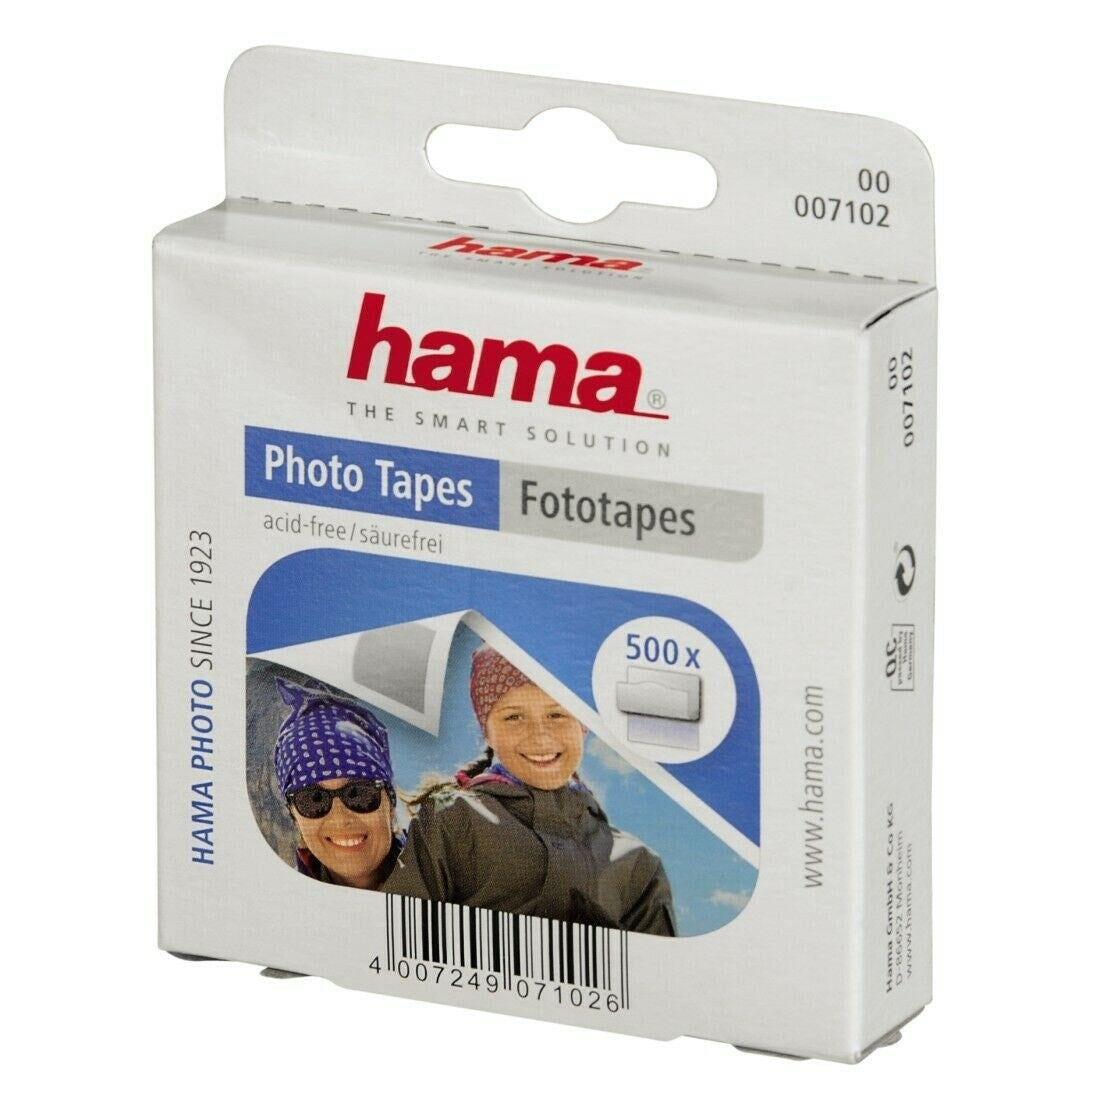 Product Image of HamaPhoto Tapes Box 1000 Double Sided Self Adhesive Tabs 7102